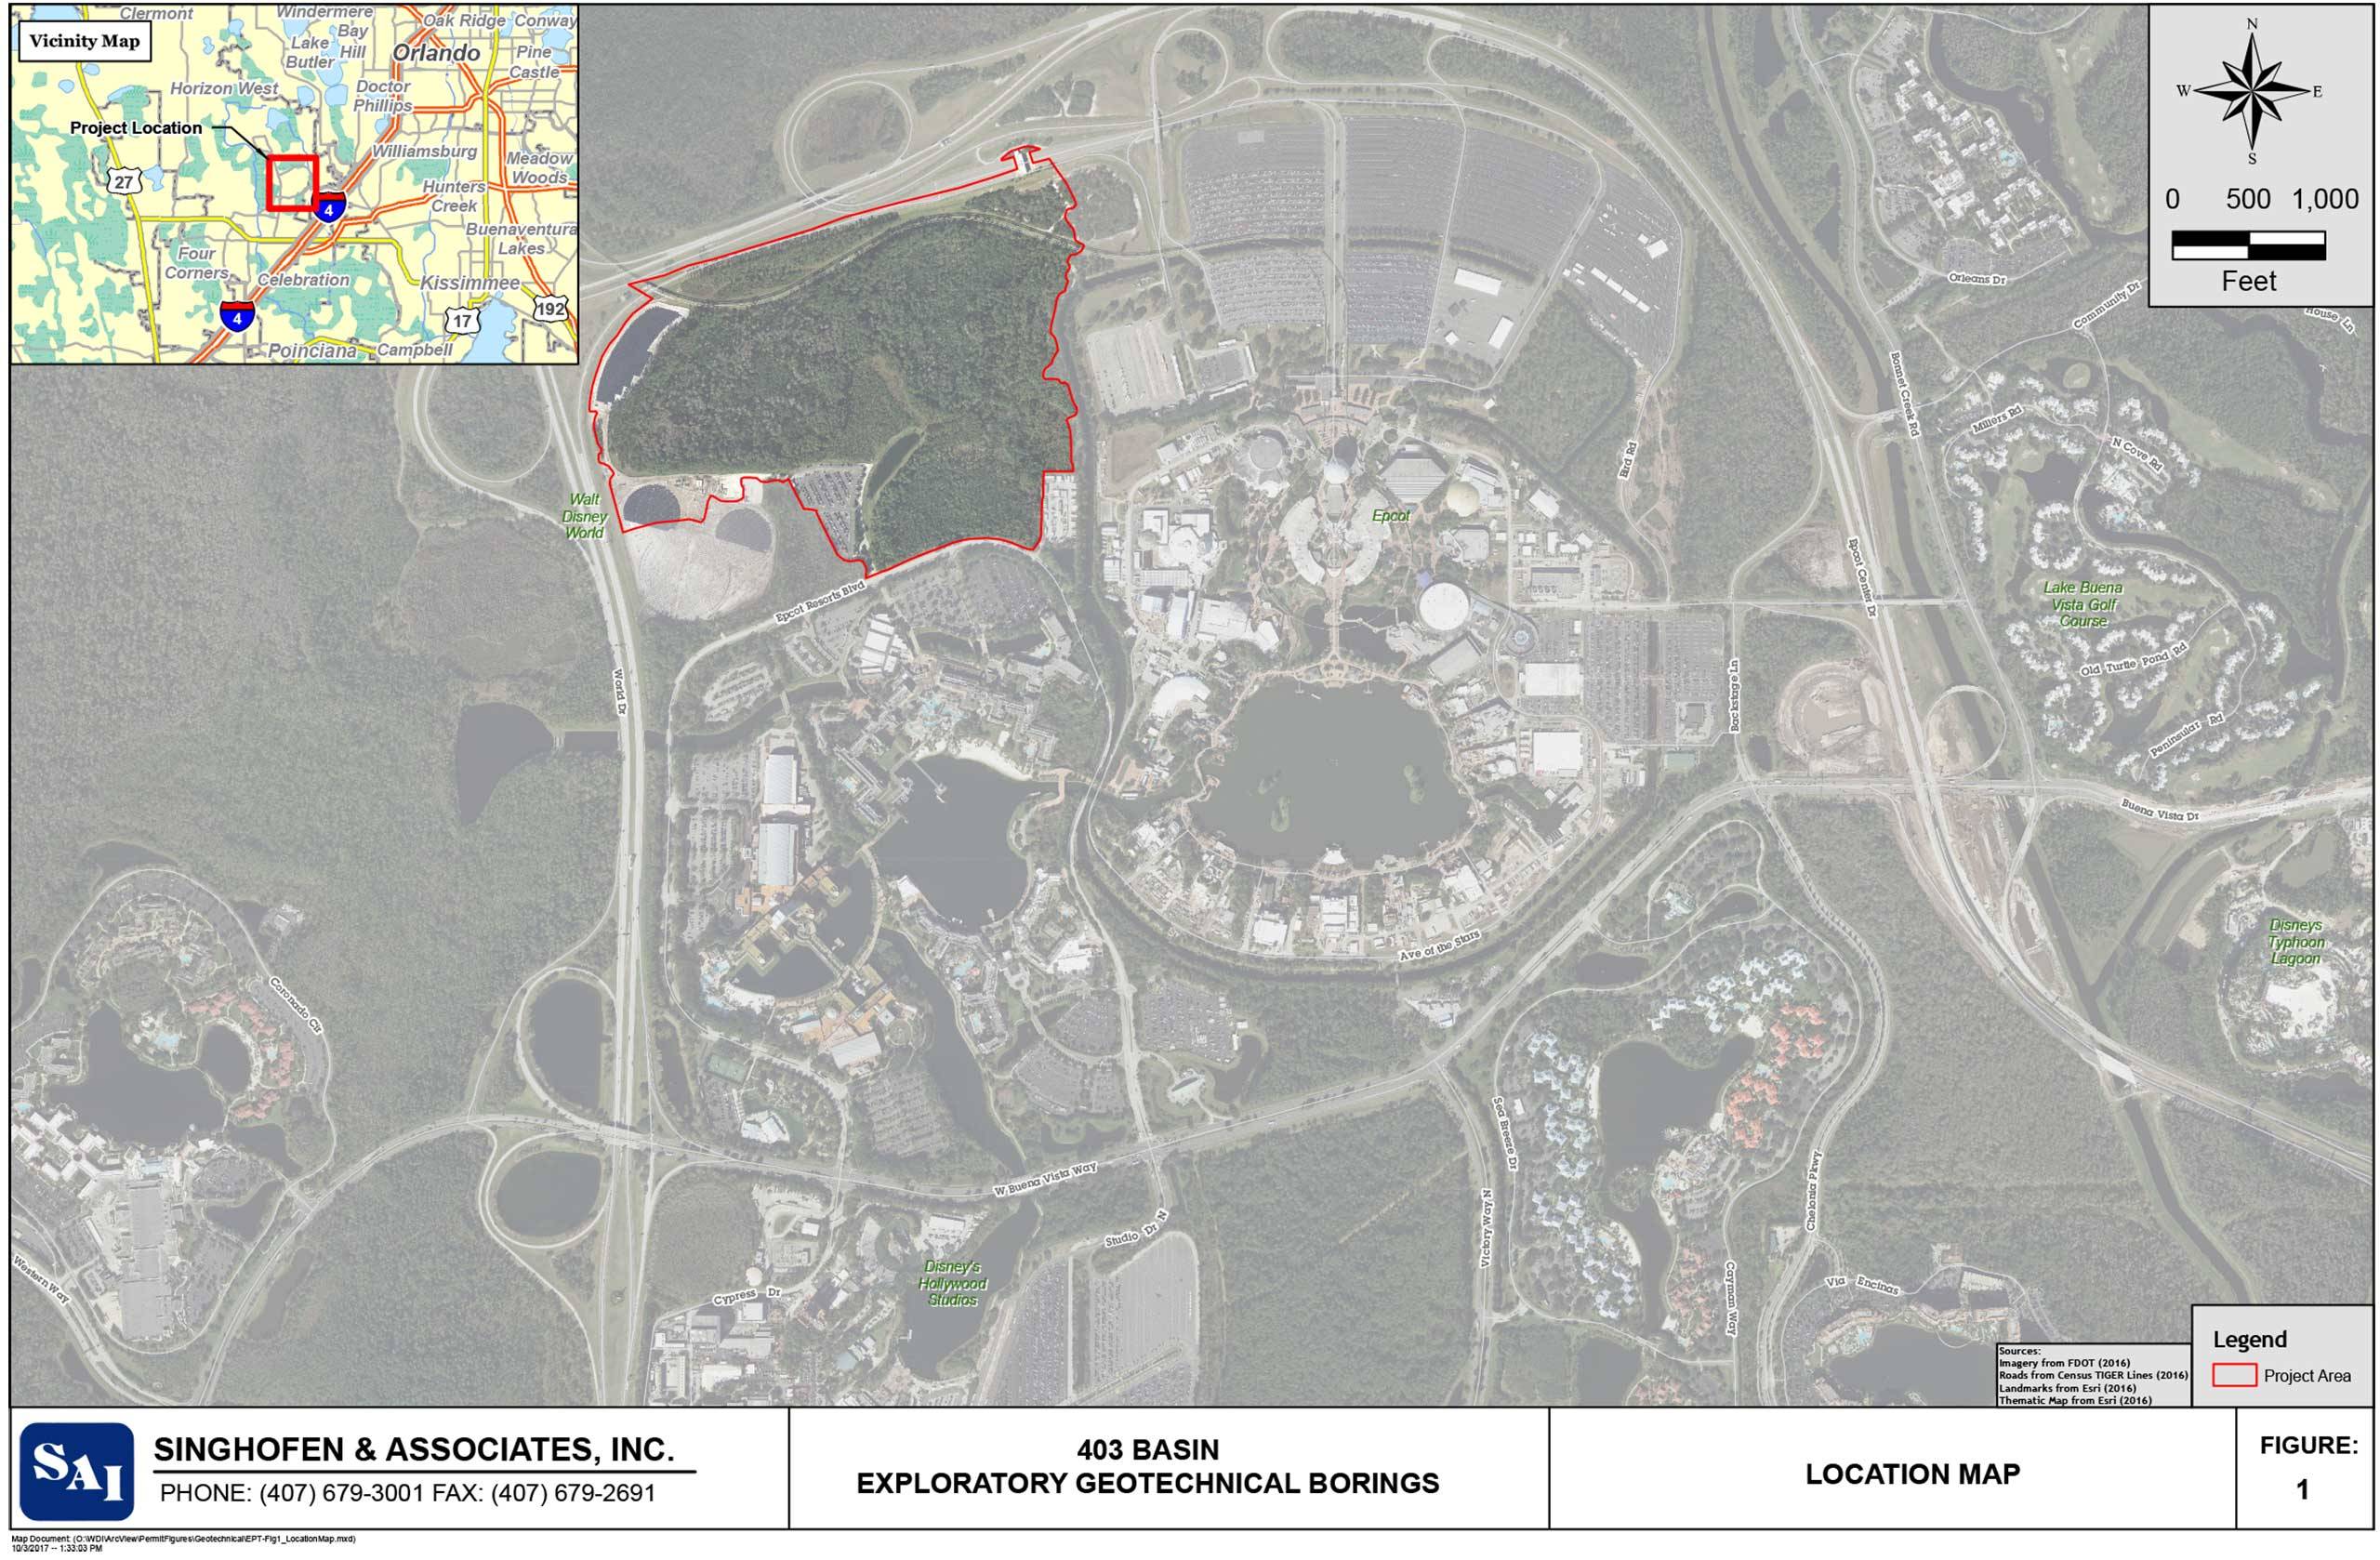 Exploratory geotechnical borings for new Epcot retention pond suggest new projects are in the works